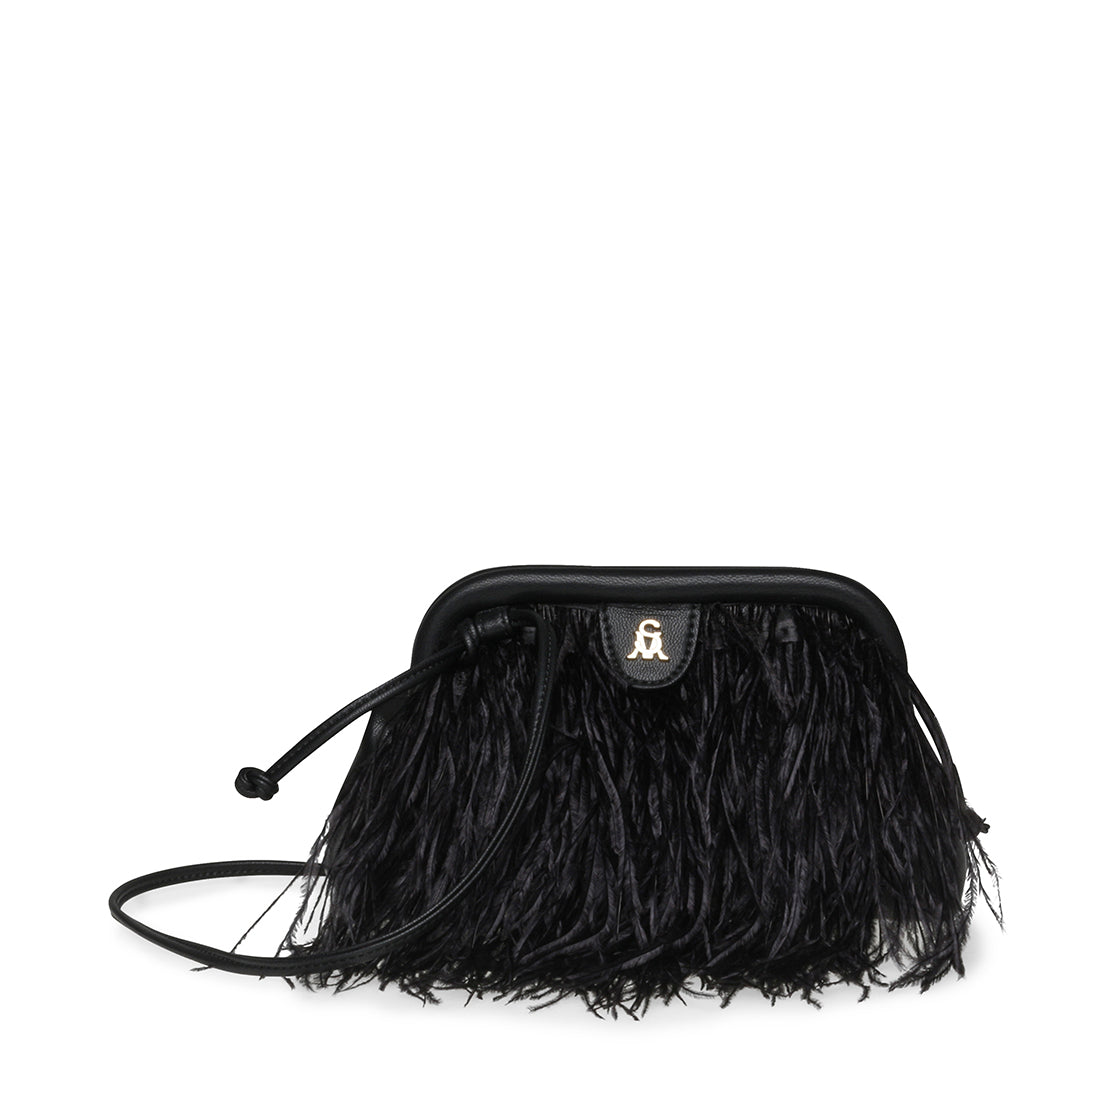 Steve Madden Handbags On Sale Up To 90% Off Retail